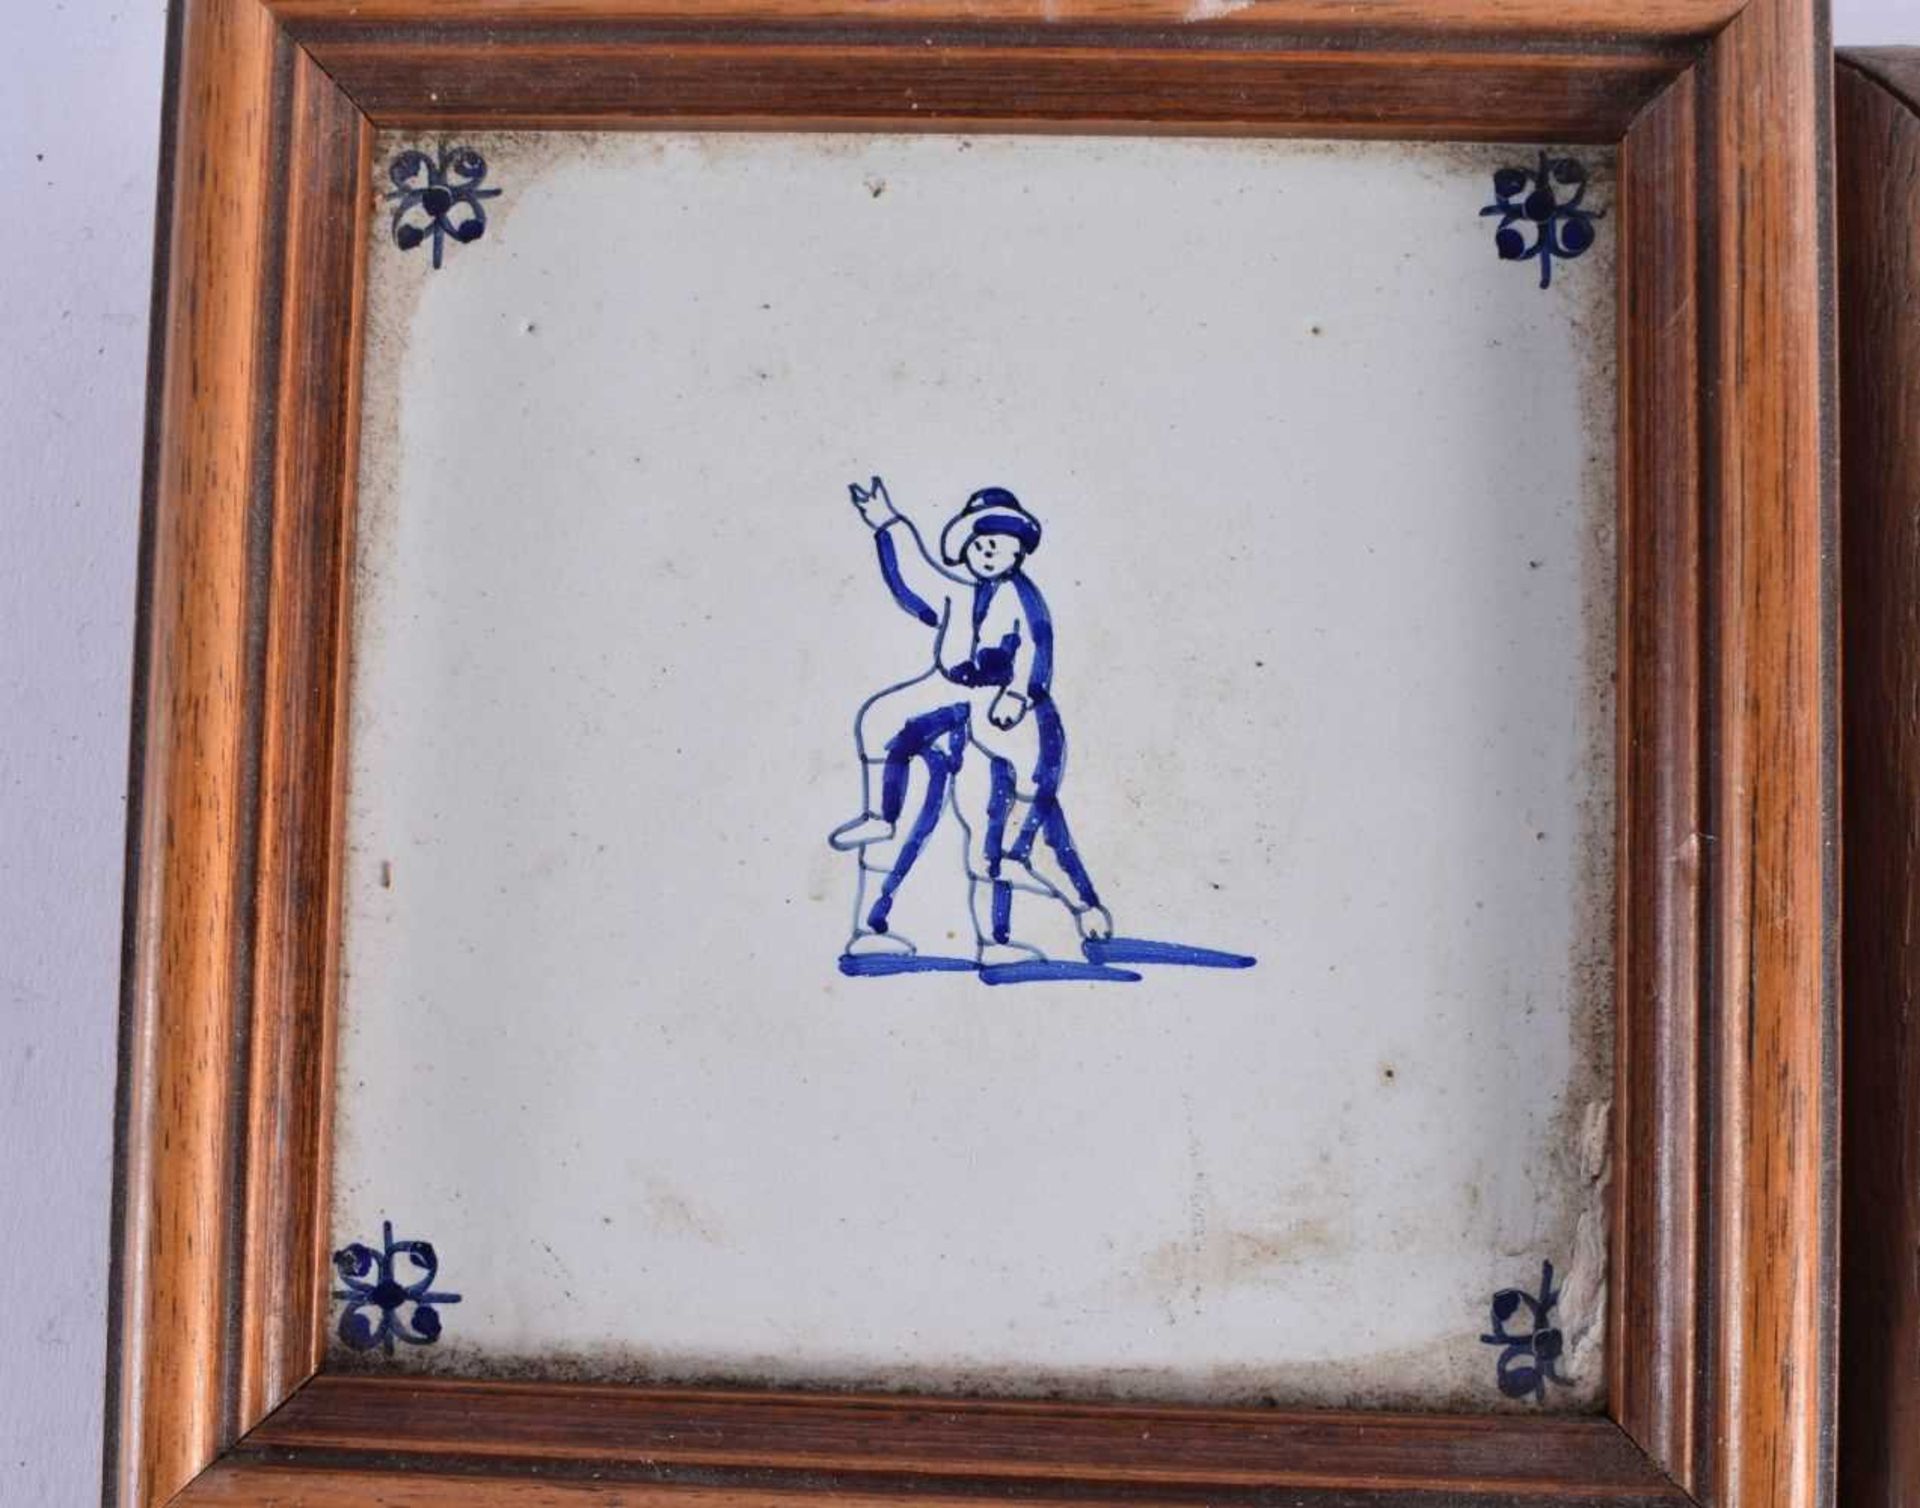 FOUR WOOD FRAMED DELFT BLUE AND WHITE TILES. 15 cm square. (4) - Image 2 of 6